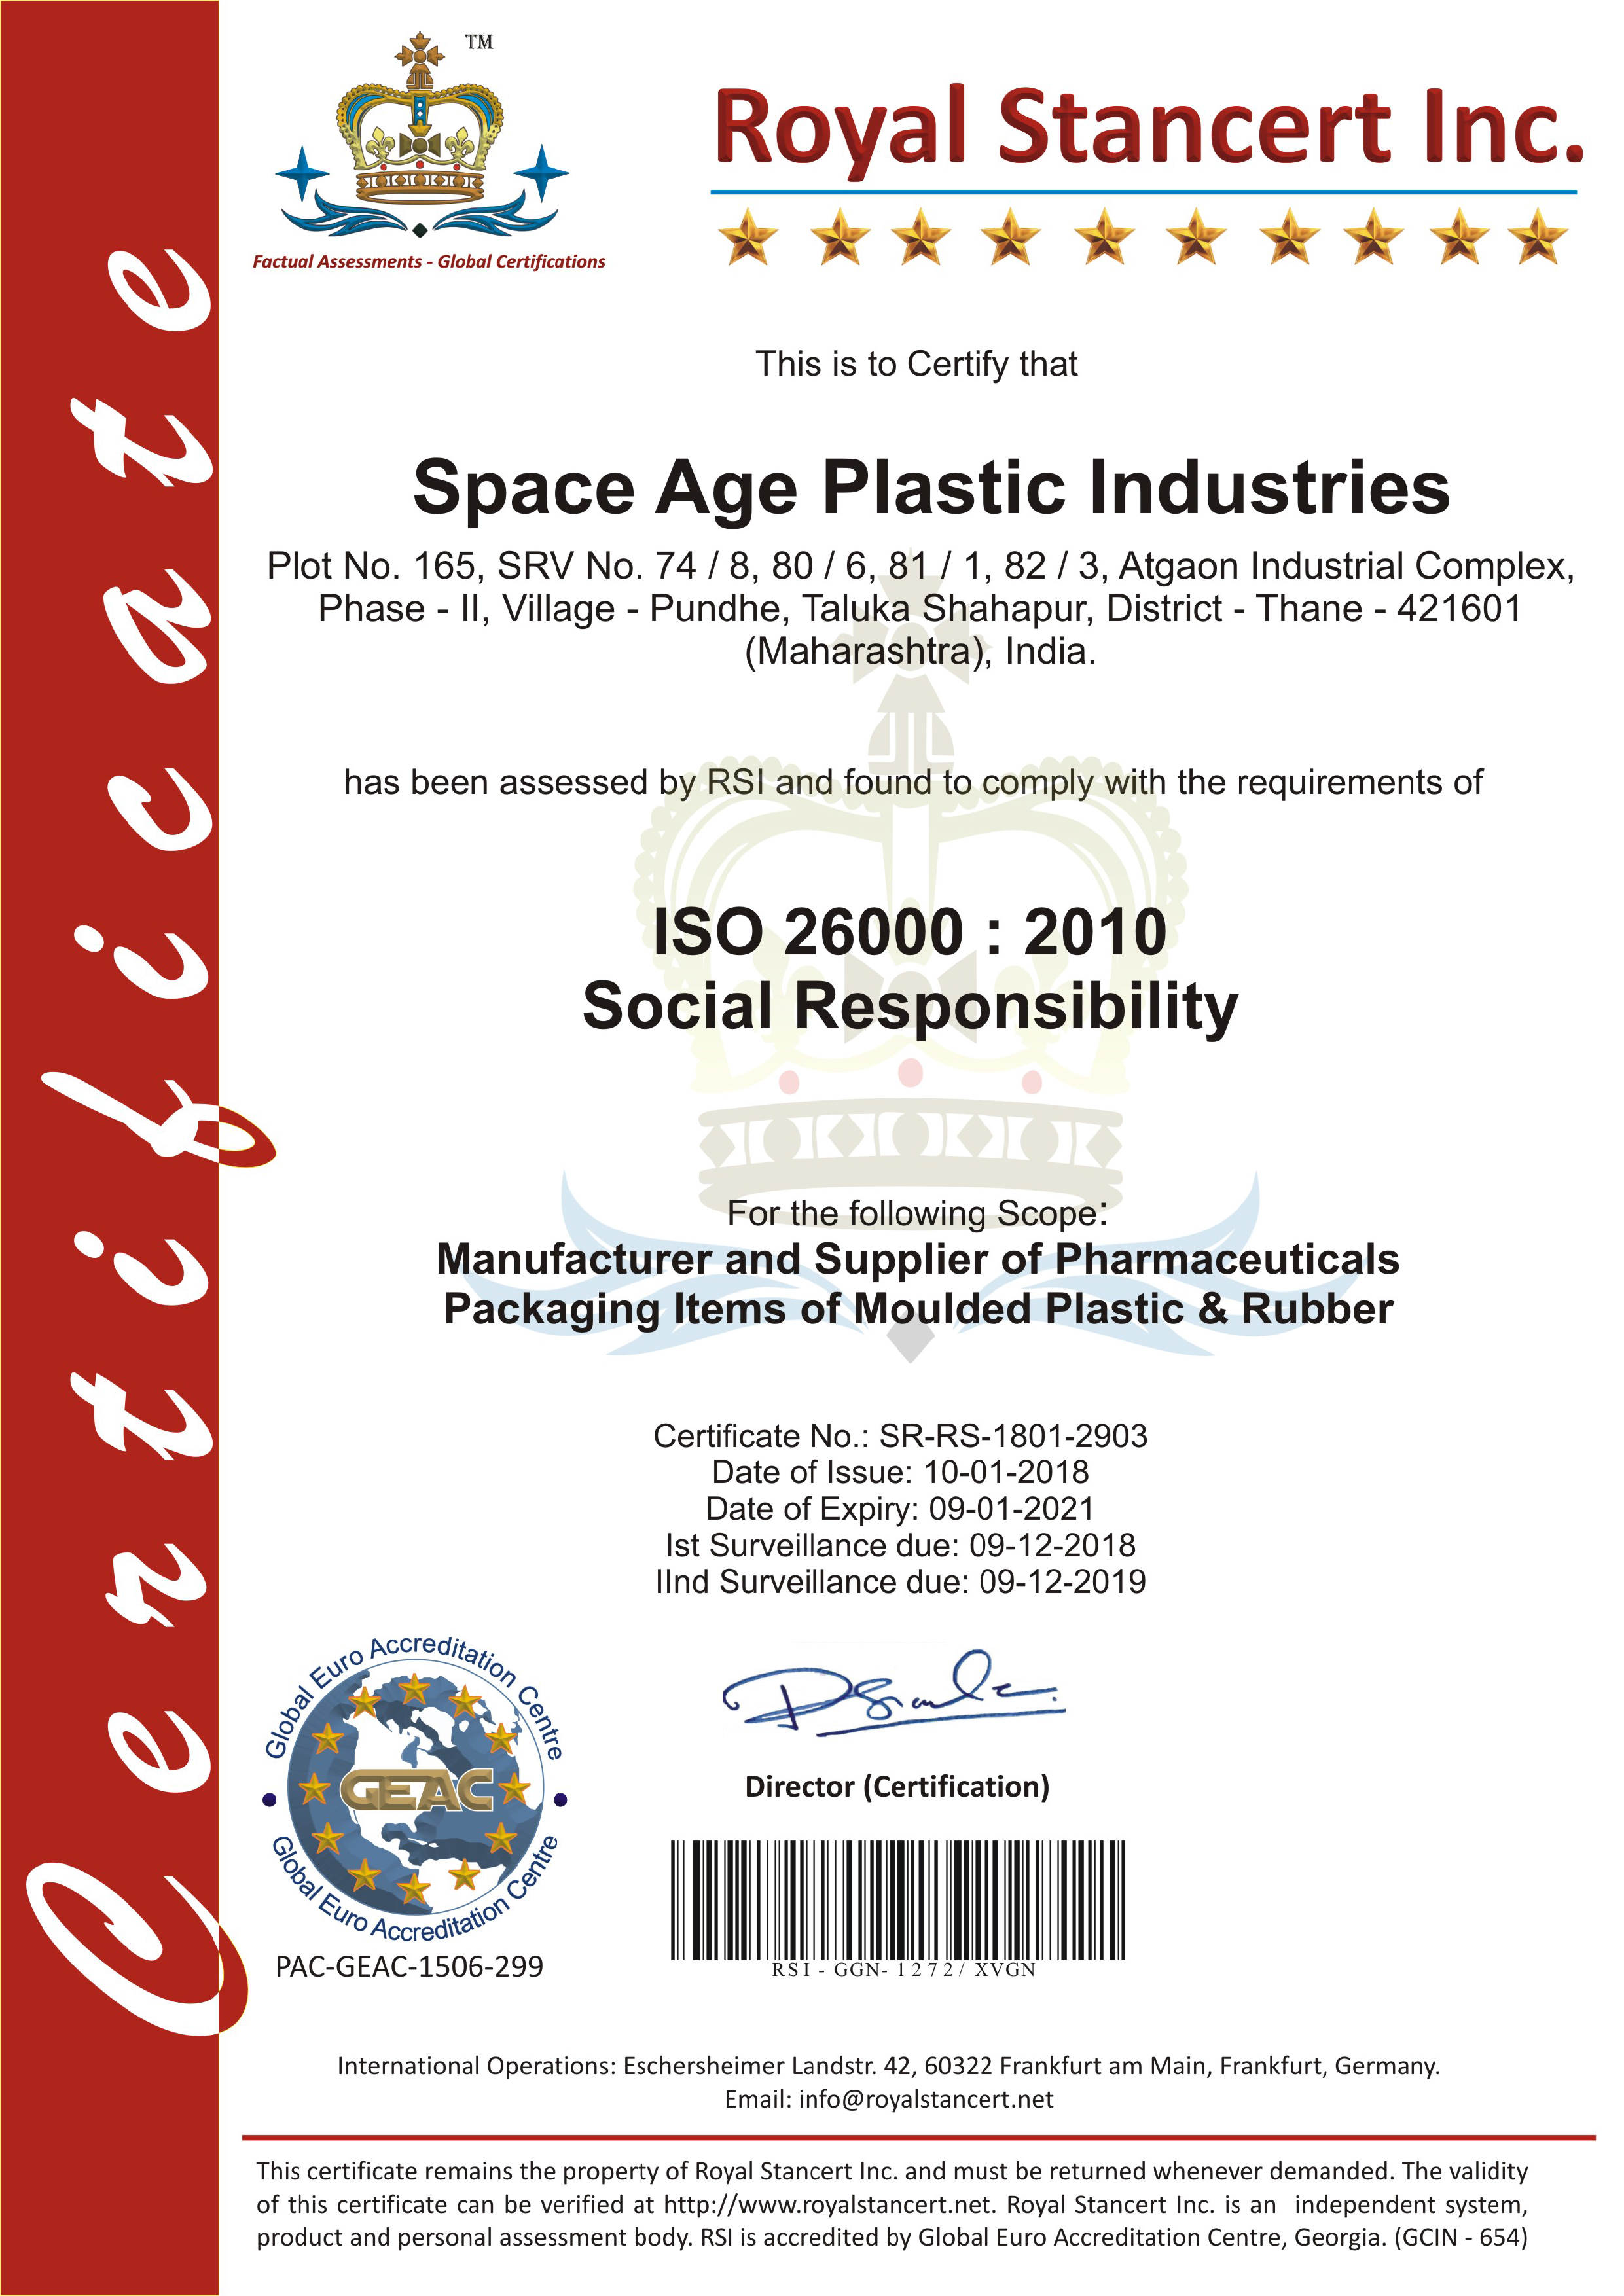 royal-stancert-INC, Social-responsibility certificate of space age plastic industry